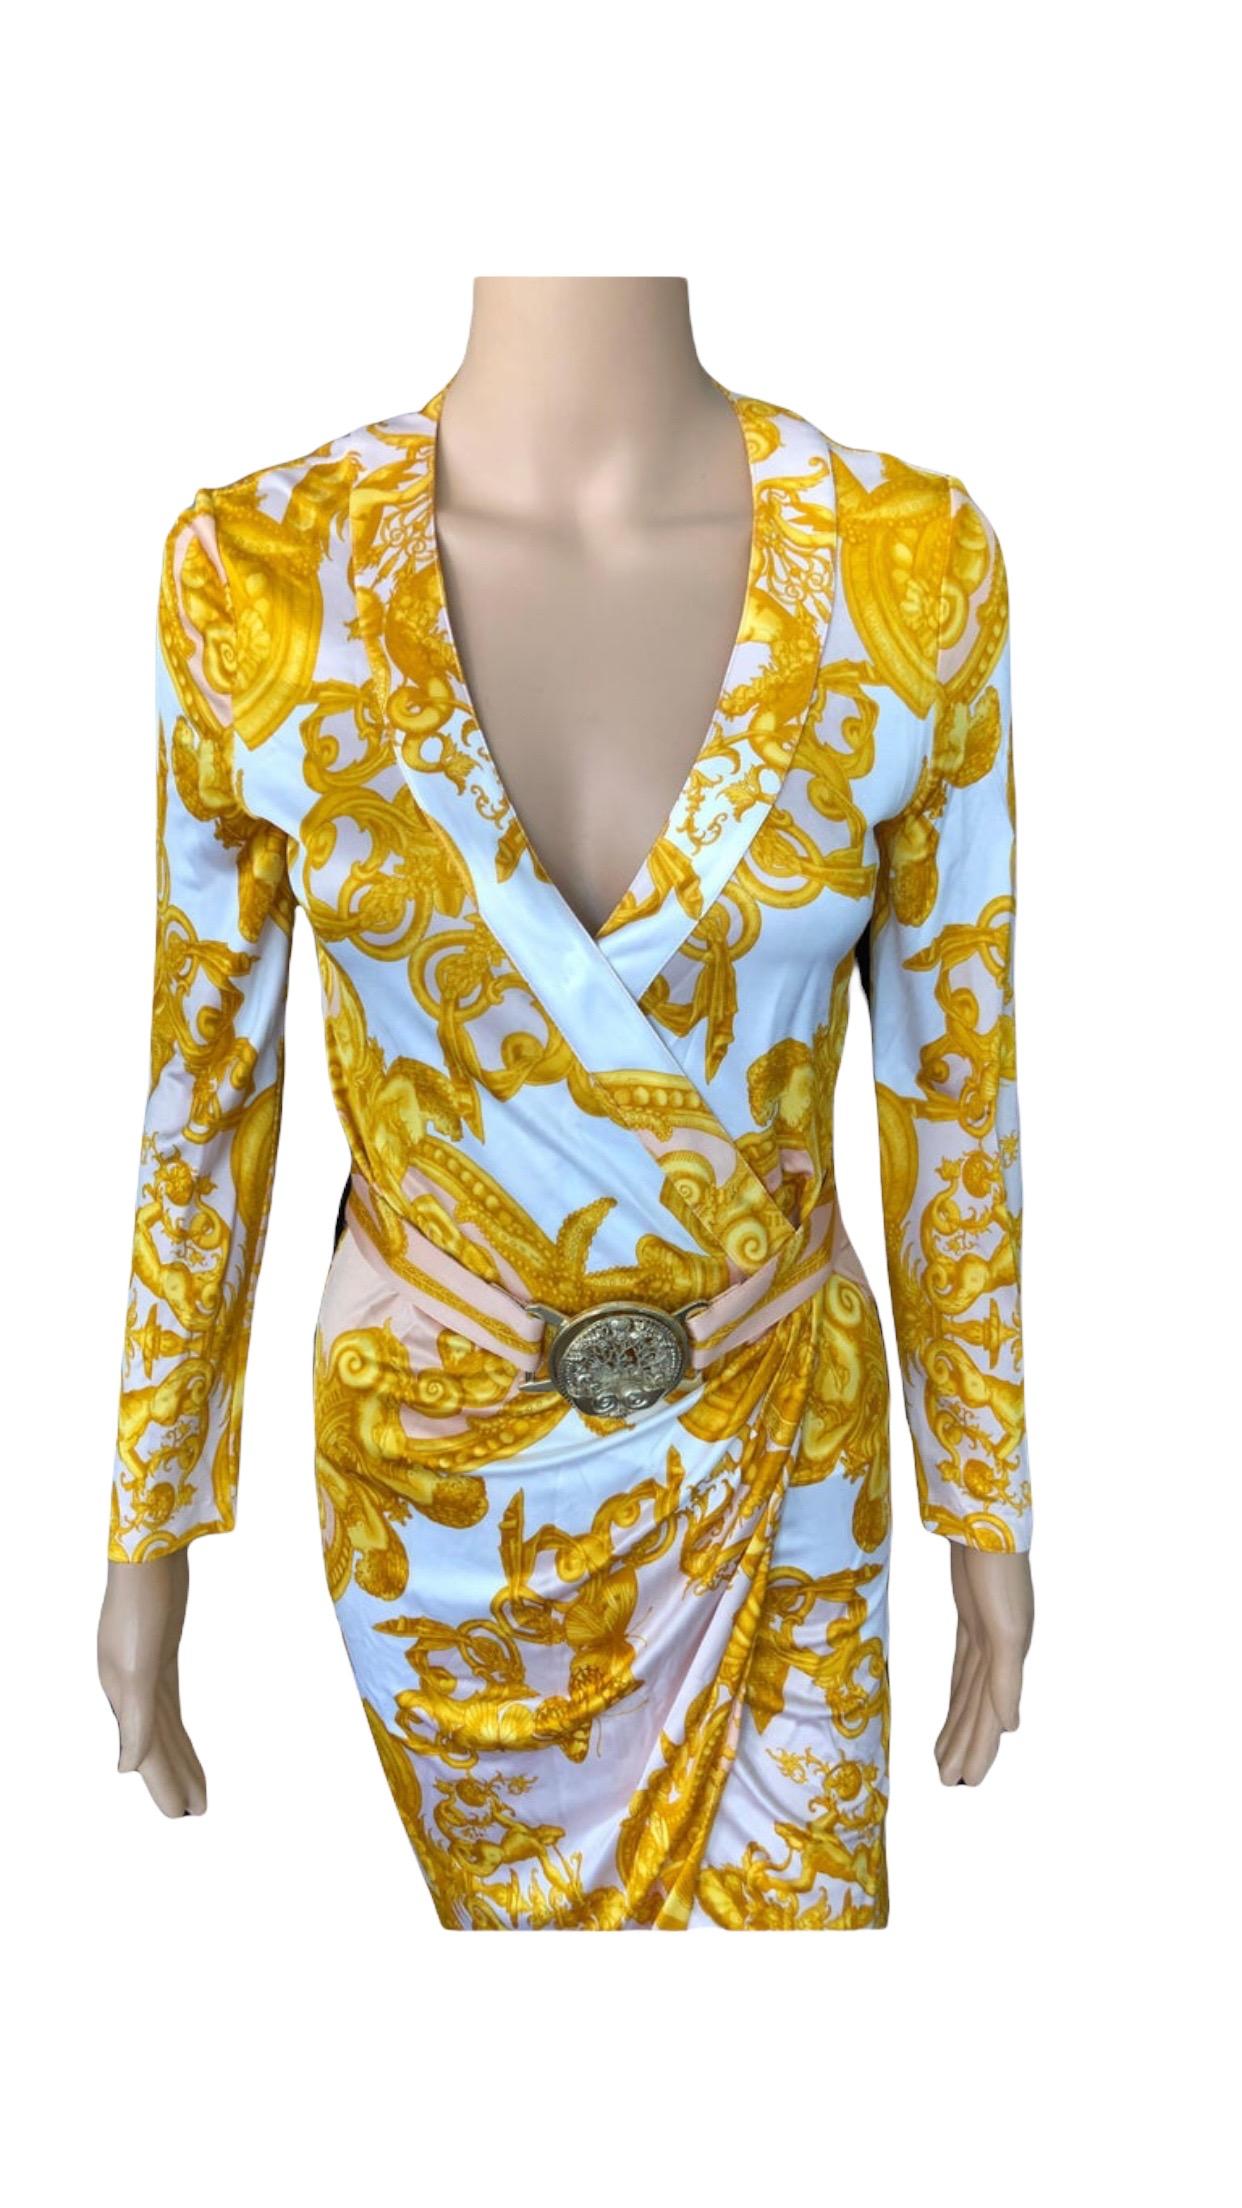 Versace S/S 2005 Runway Baroque Print Belted Wrap Dress In Excellent Condition For Sale In Naples, FL